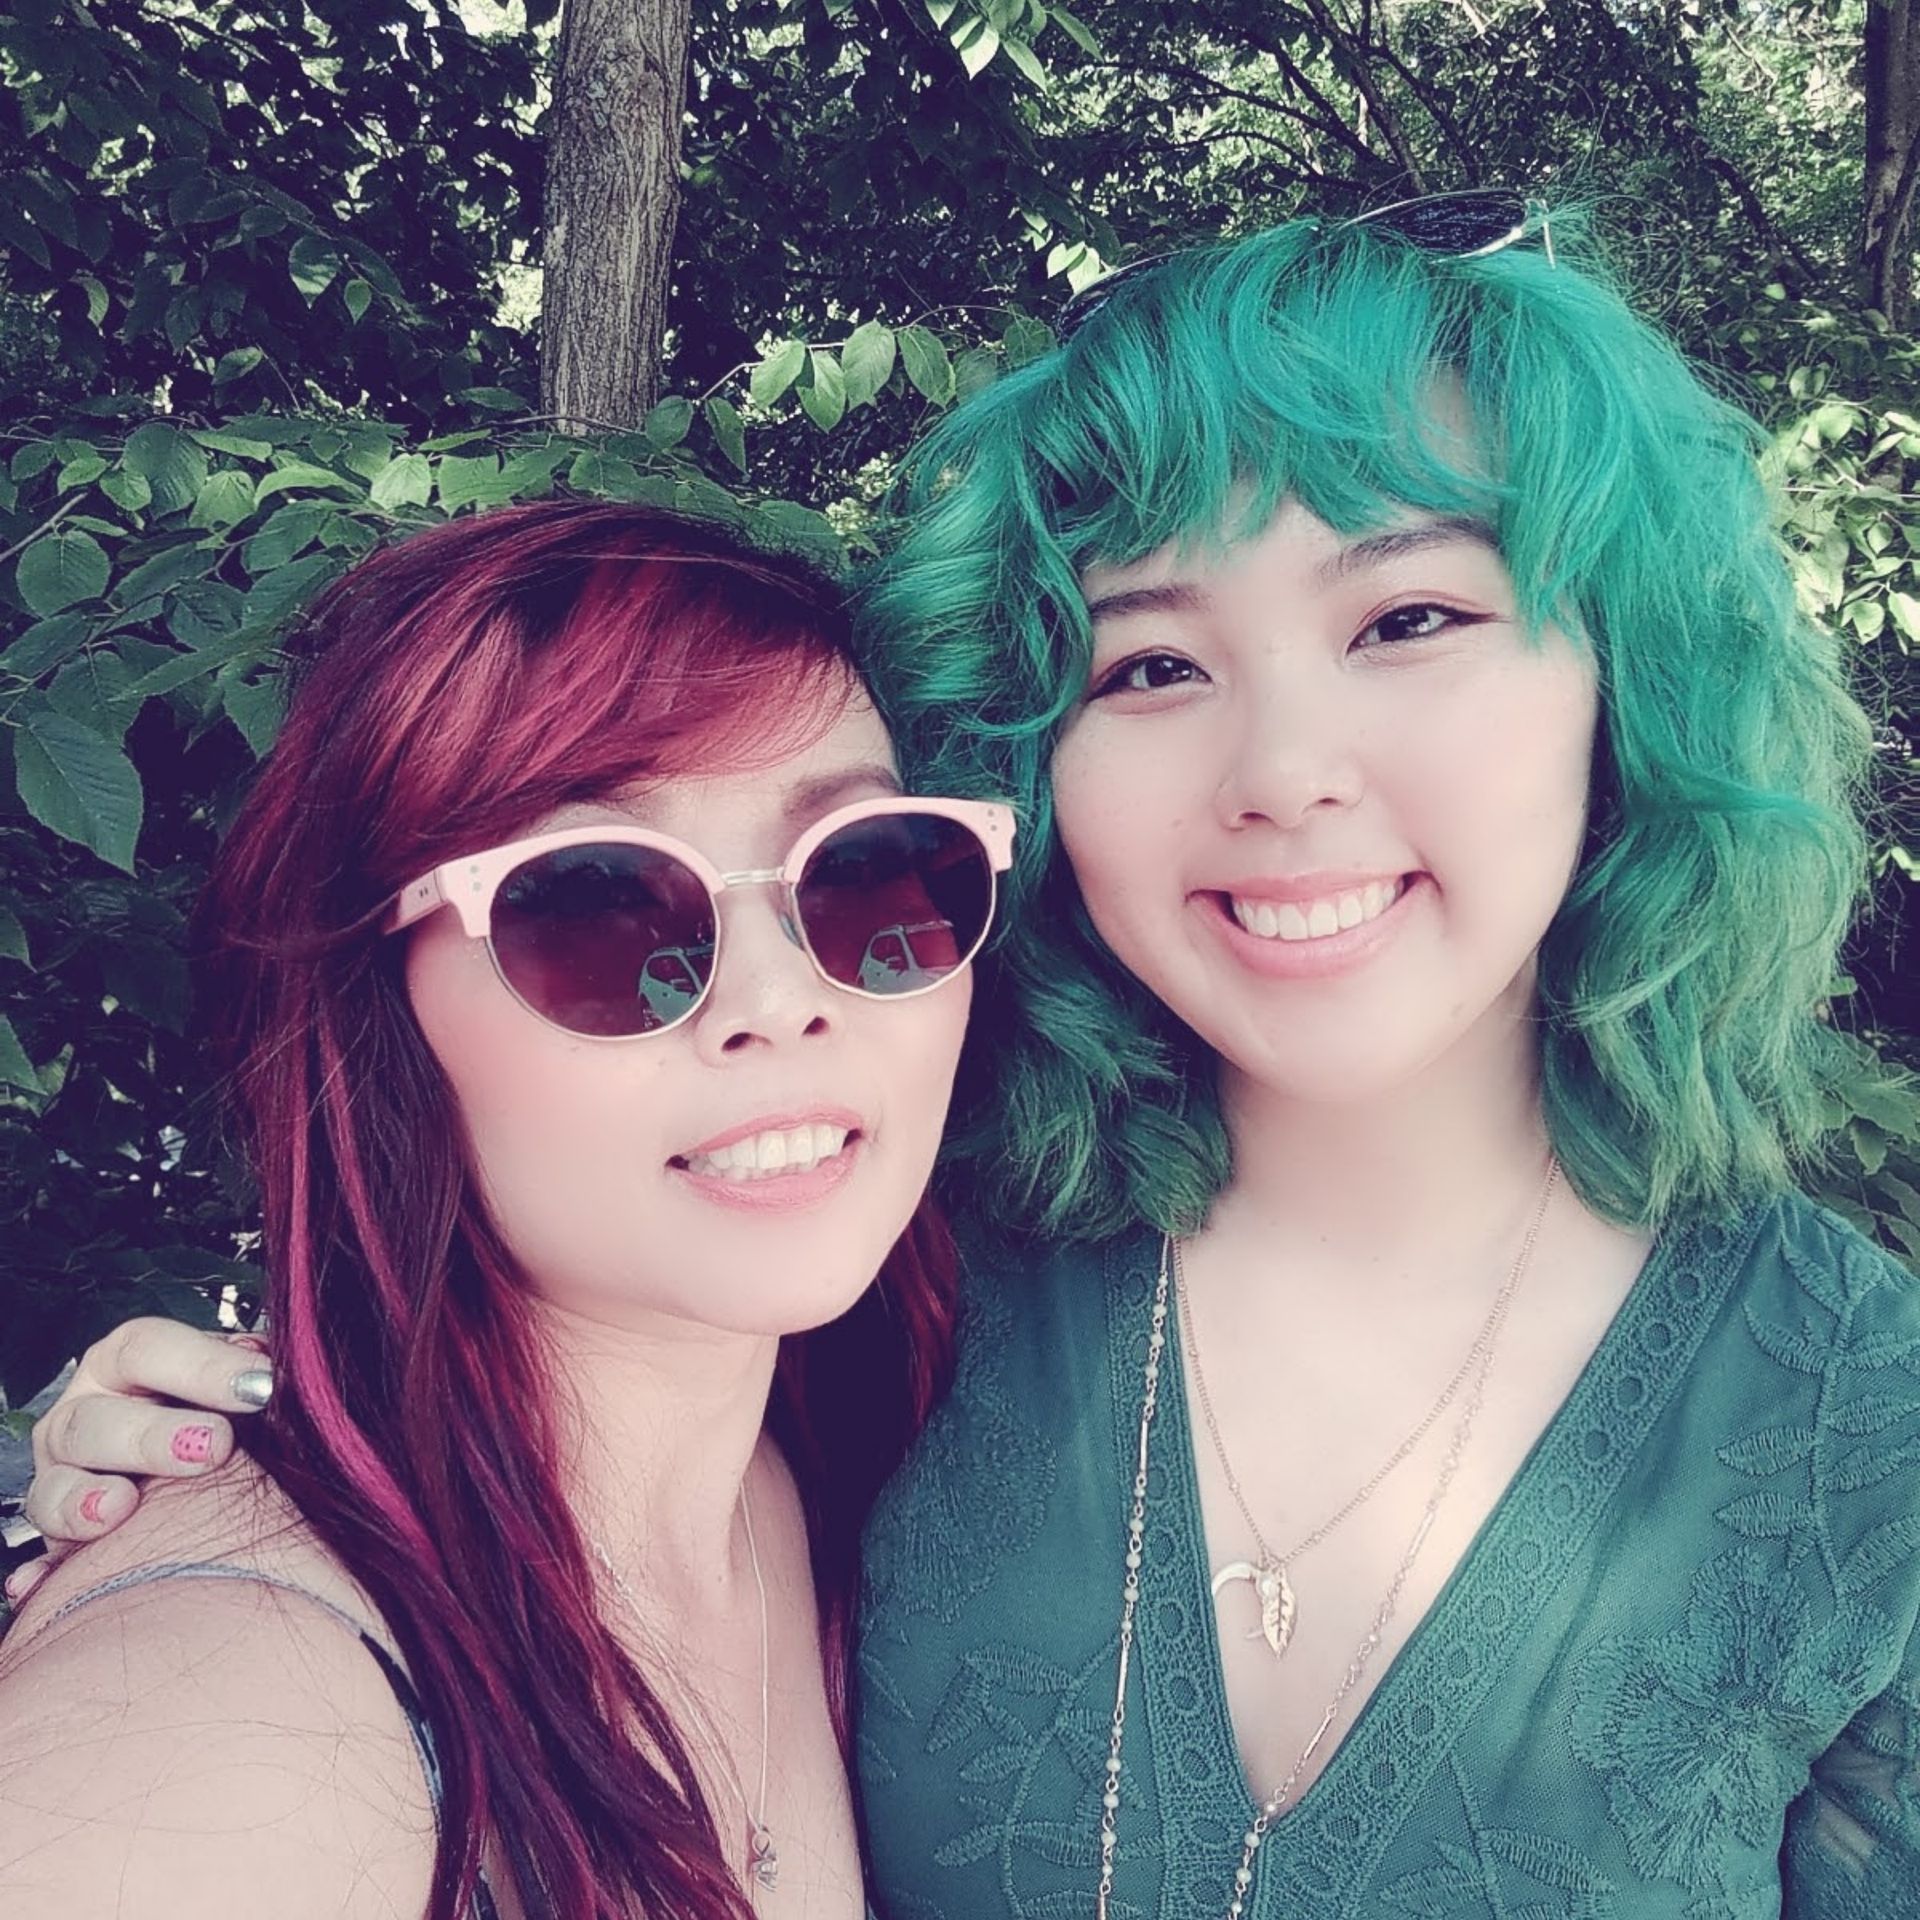 two women with red hair and green hair are posing for a picture